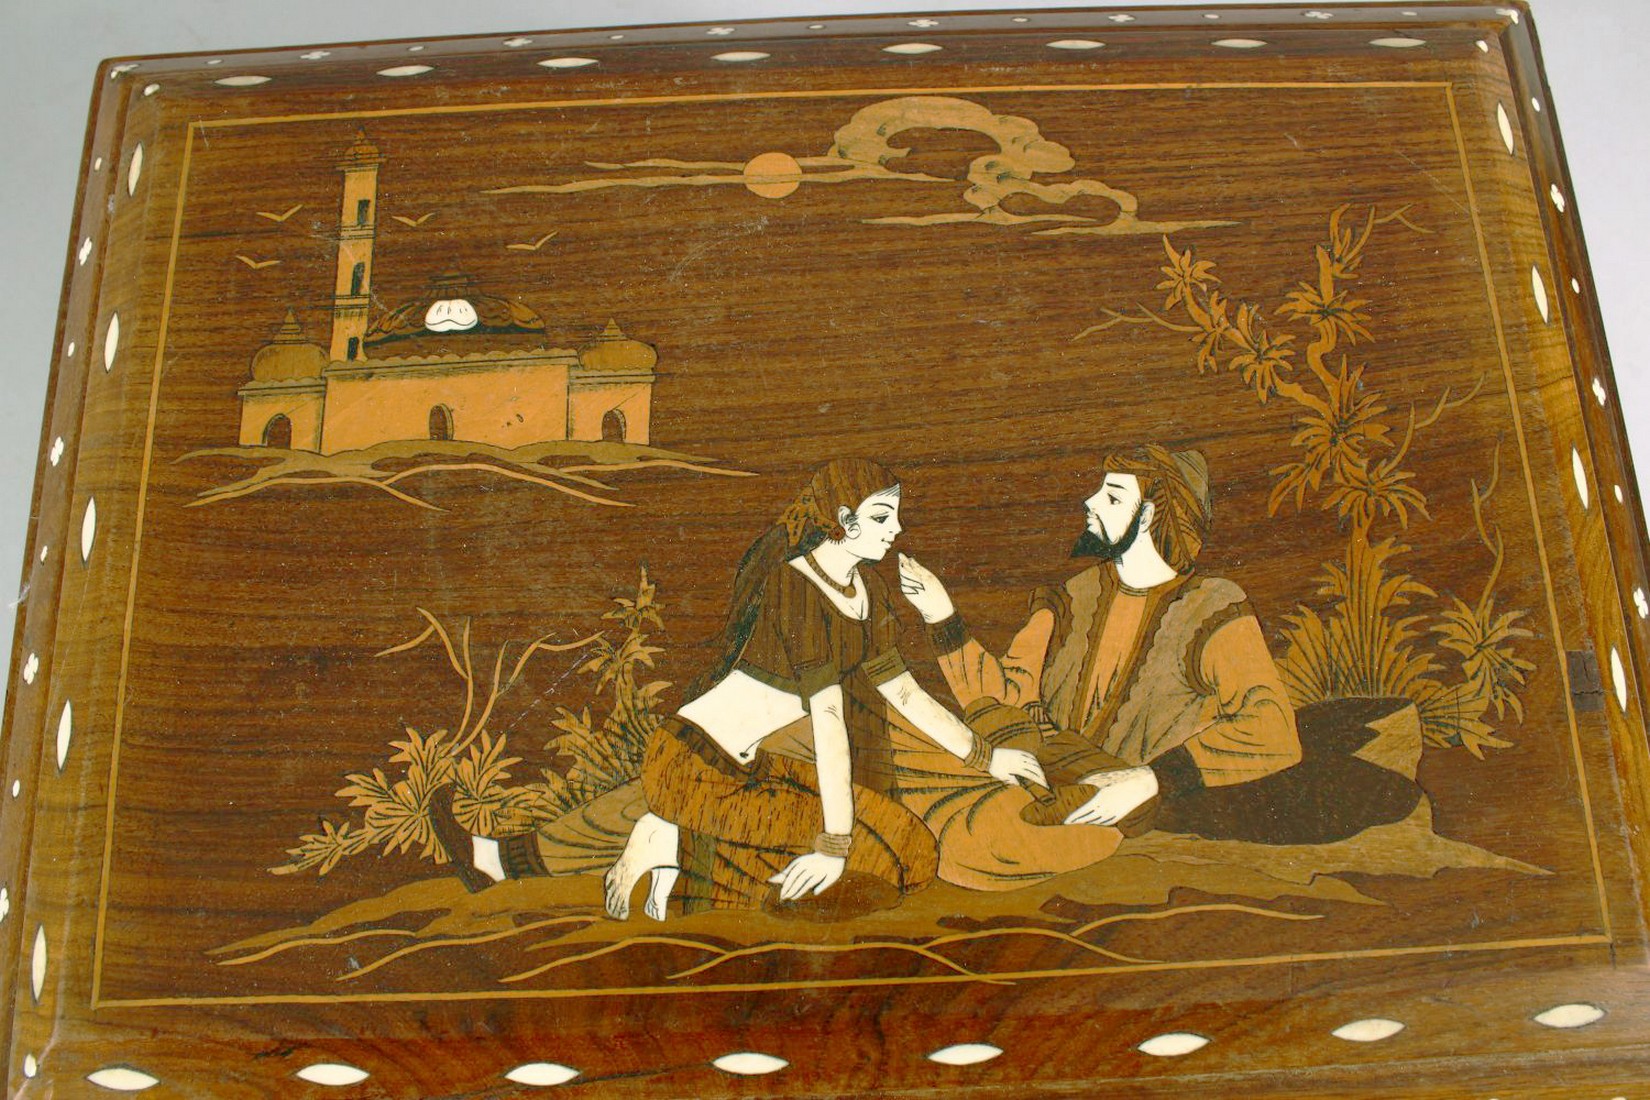 AN INDIAN BONE INLAID WOODEN BOX, inlaid with romantic figures in a landscape, with inlaid border - Image 3 of 5